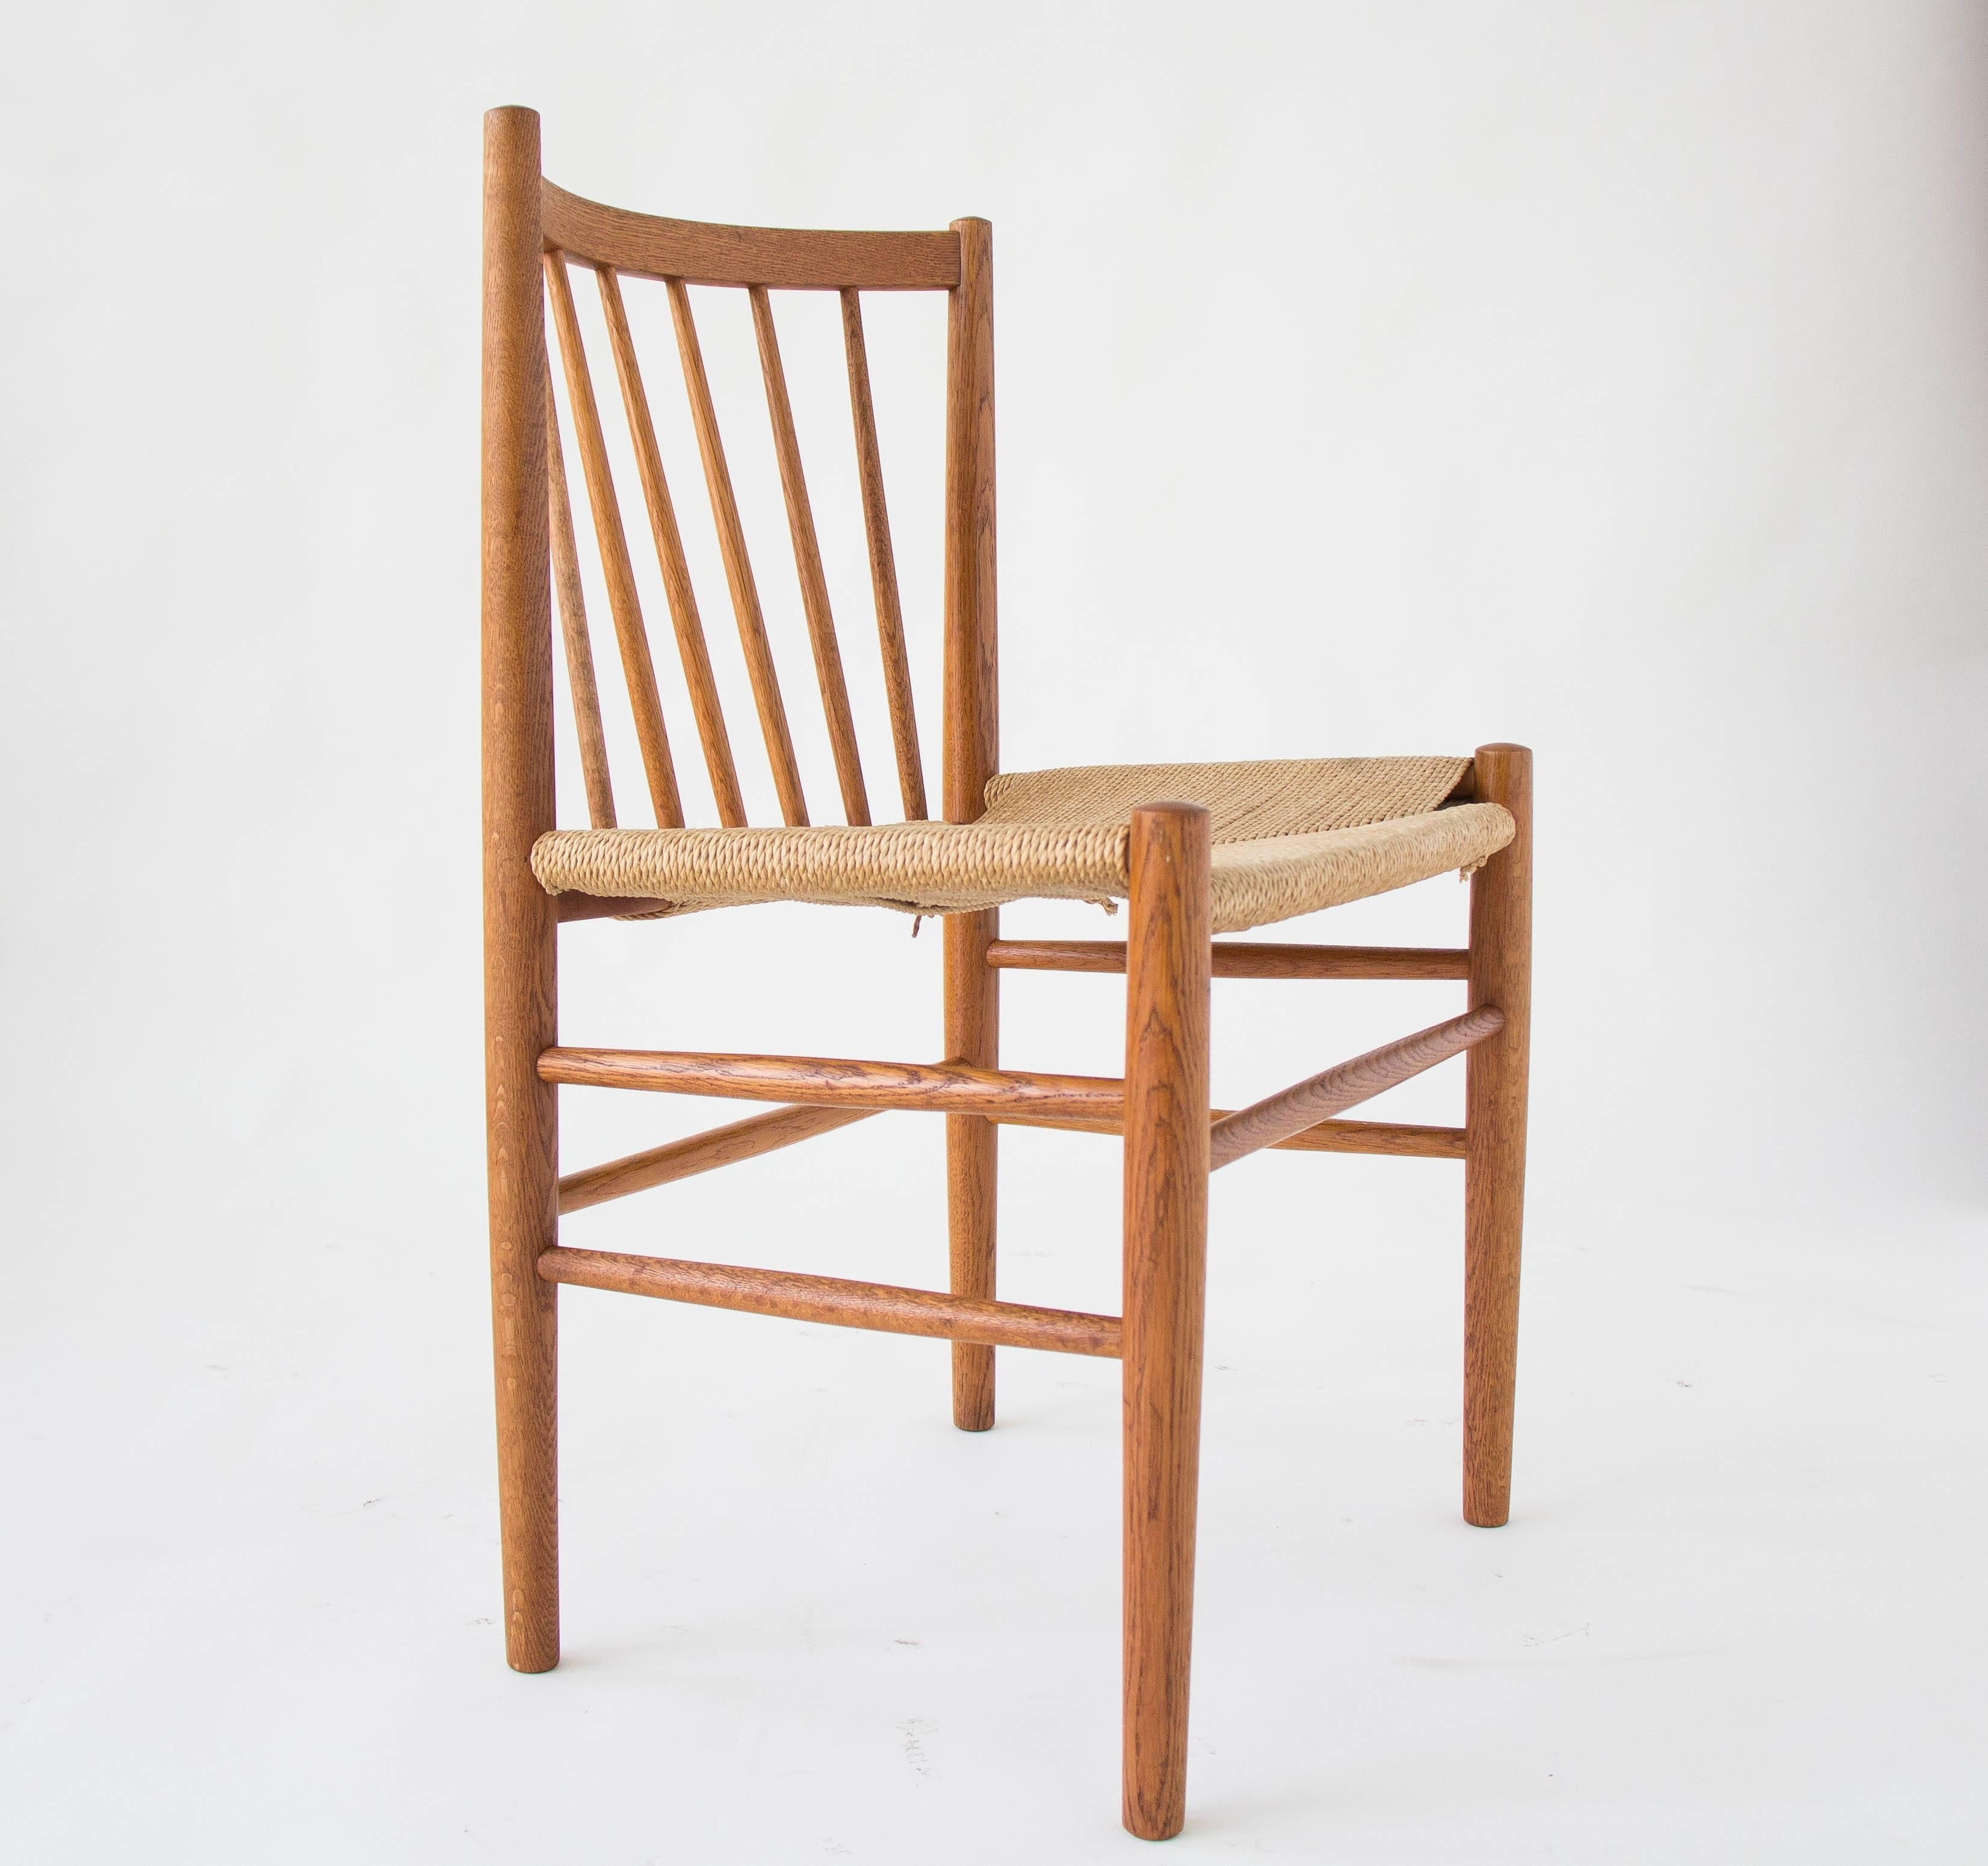 A set of six oak modeled after the J80 dining chair from FDB Møbler, designed by Jørgen Bækmark. Each chair has a curved backrest and six vertical dowels pitched at an angle for support and comfort. The comparatively wide seat is woven in paper